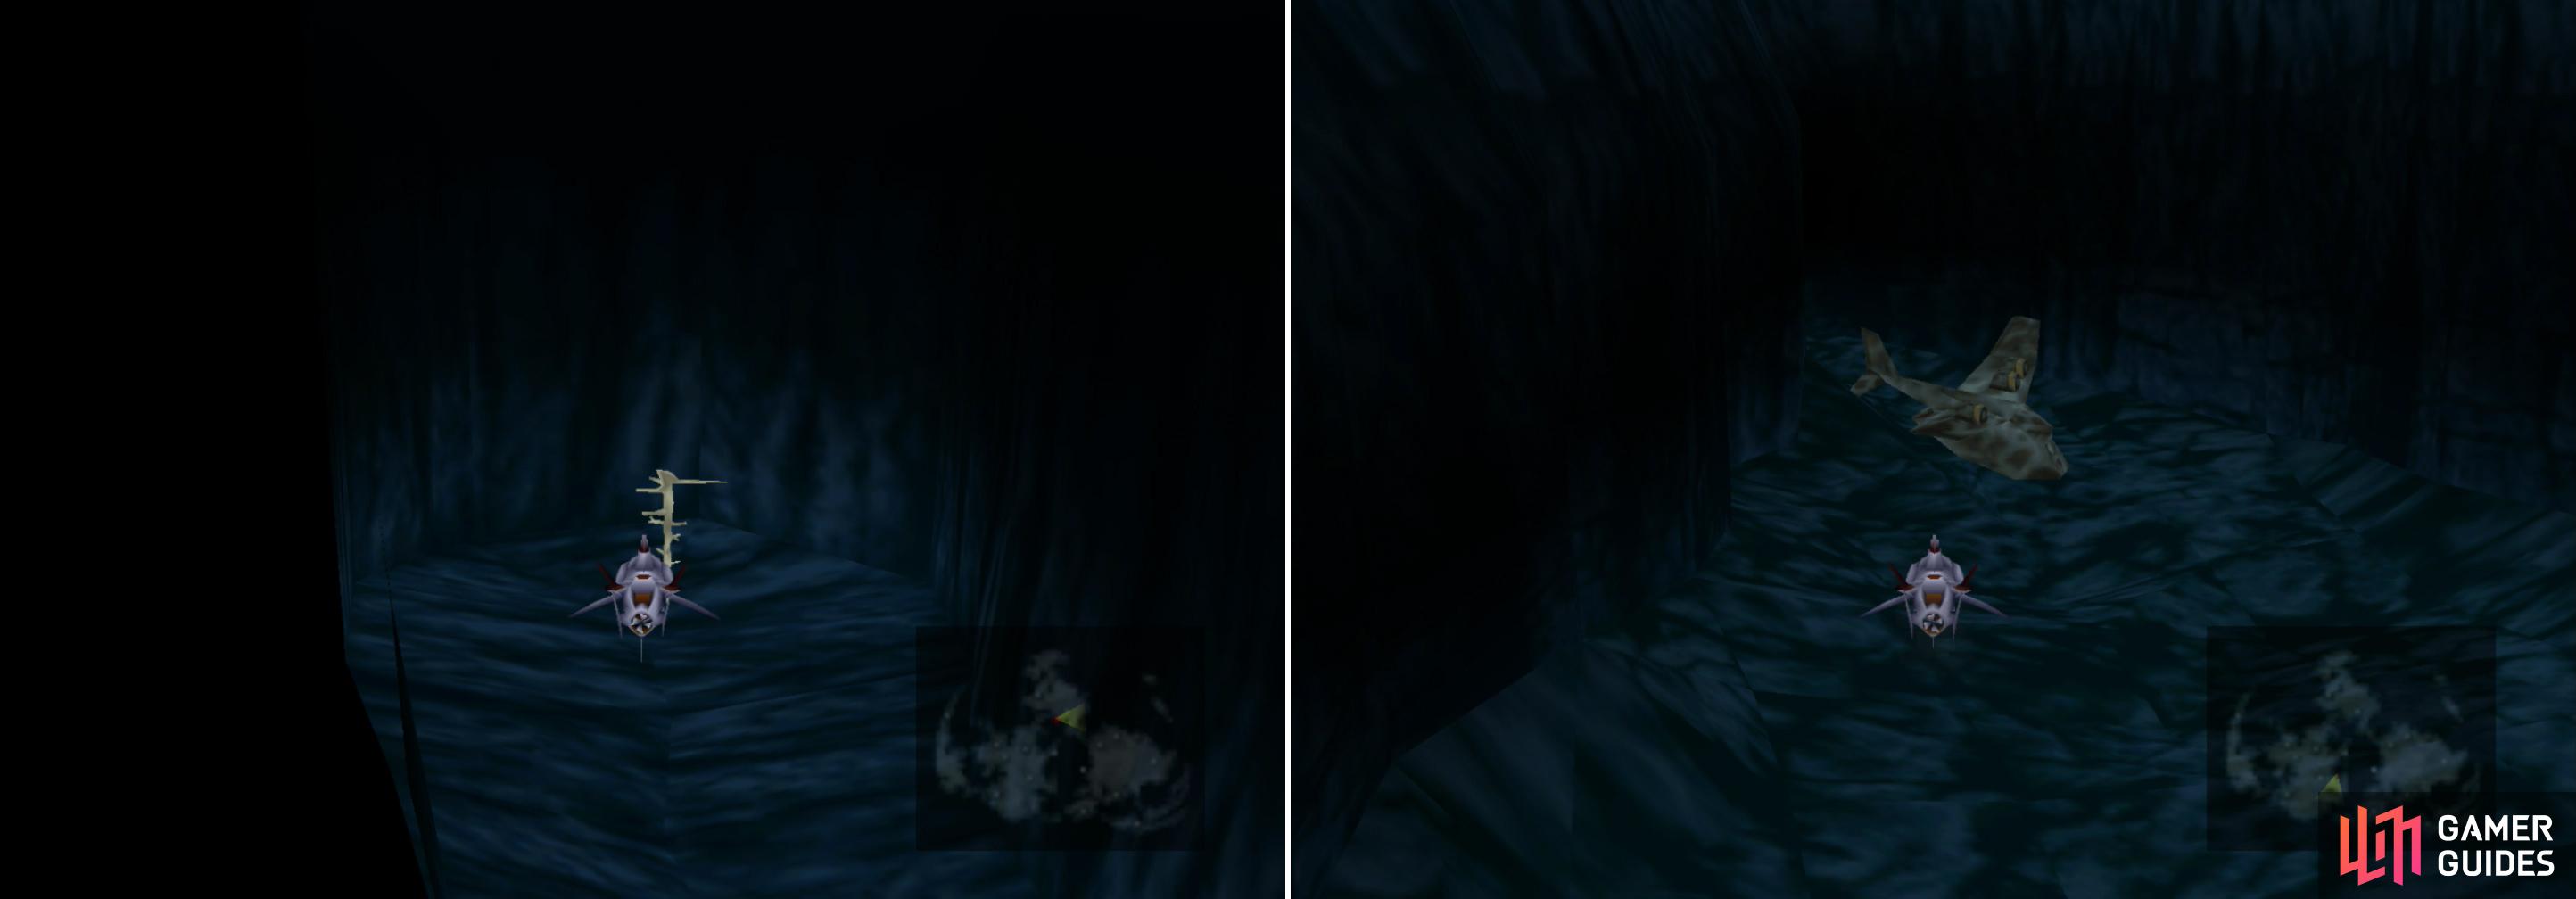 Find a cave along the northern continental shelf, in which you’ll find the Key of Ancients (left), then locate the sunken Gelnika on the sea floor near Costa del Sol (right).